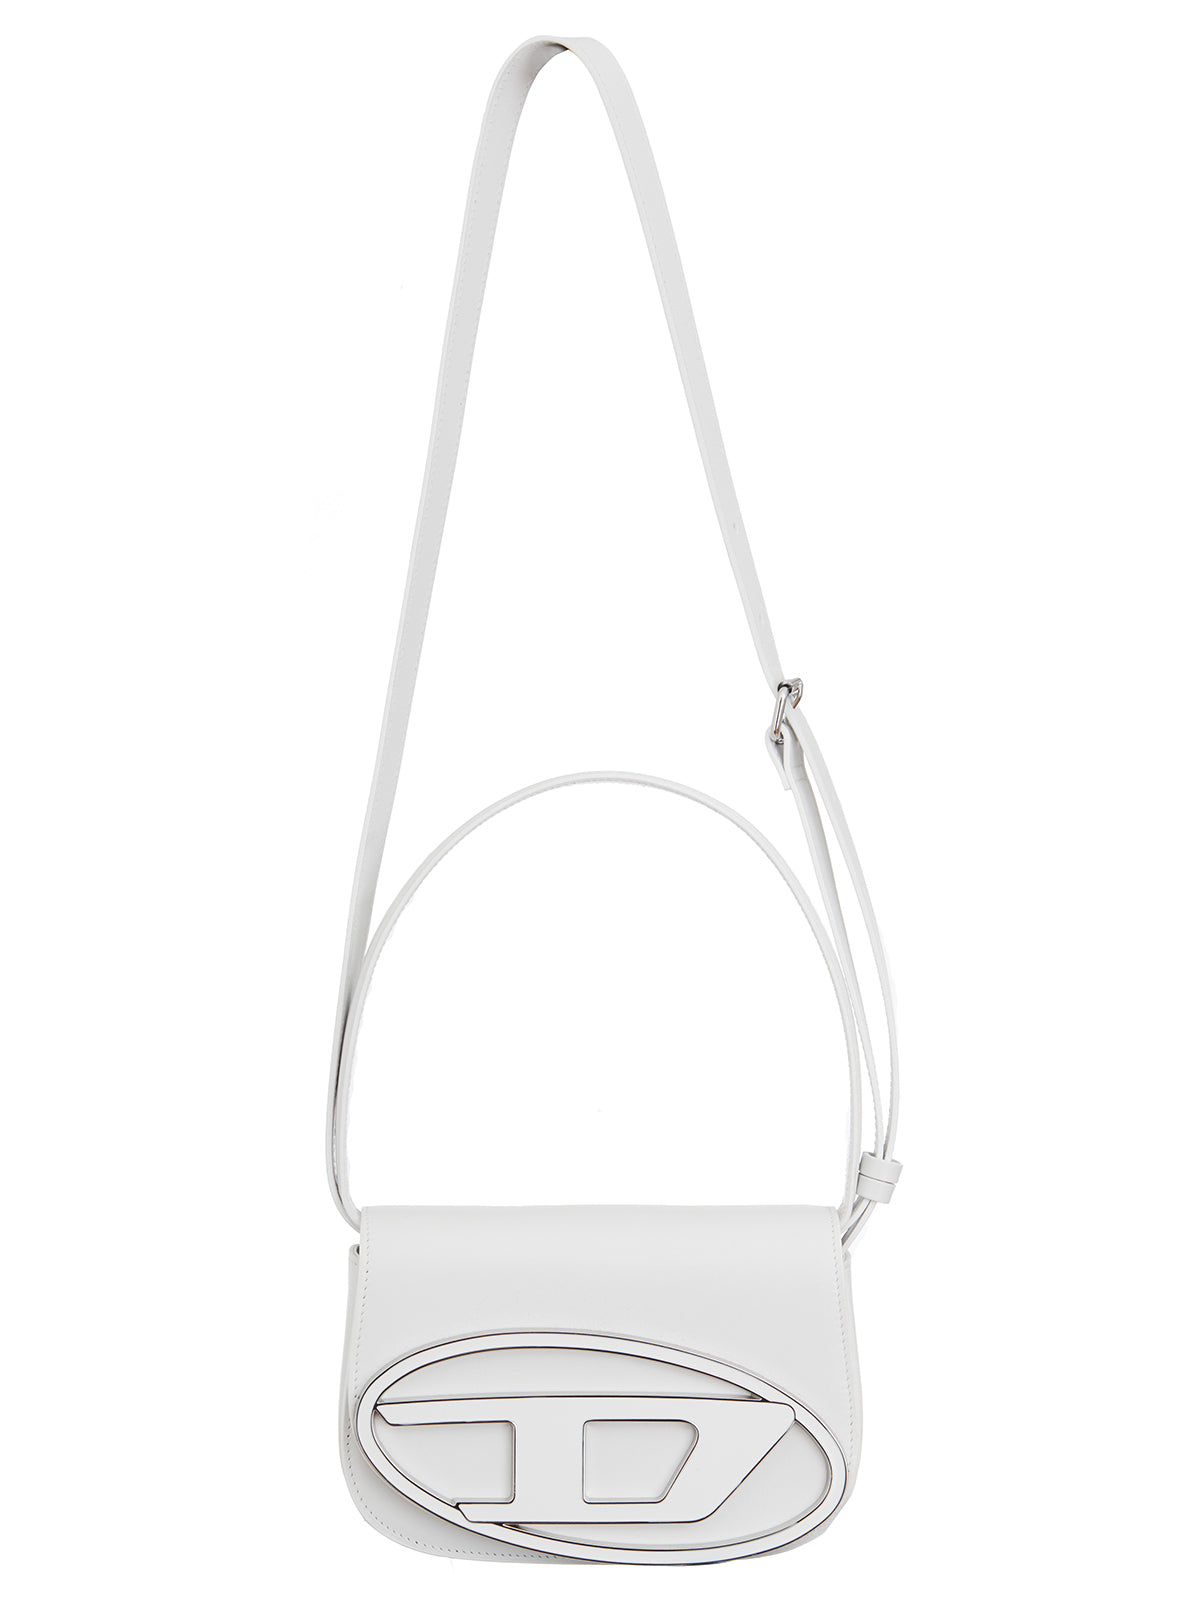 DIESEL White Leather Shoulder Bag with Removable Strap and Magnetic Closure